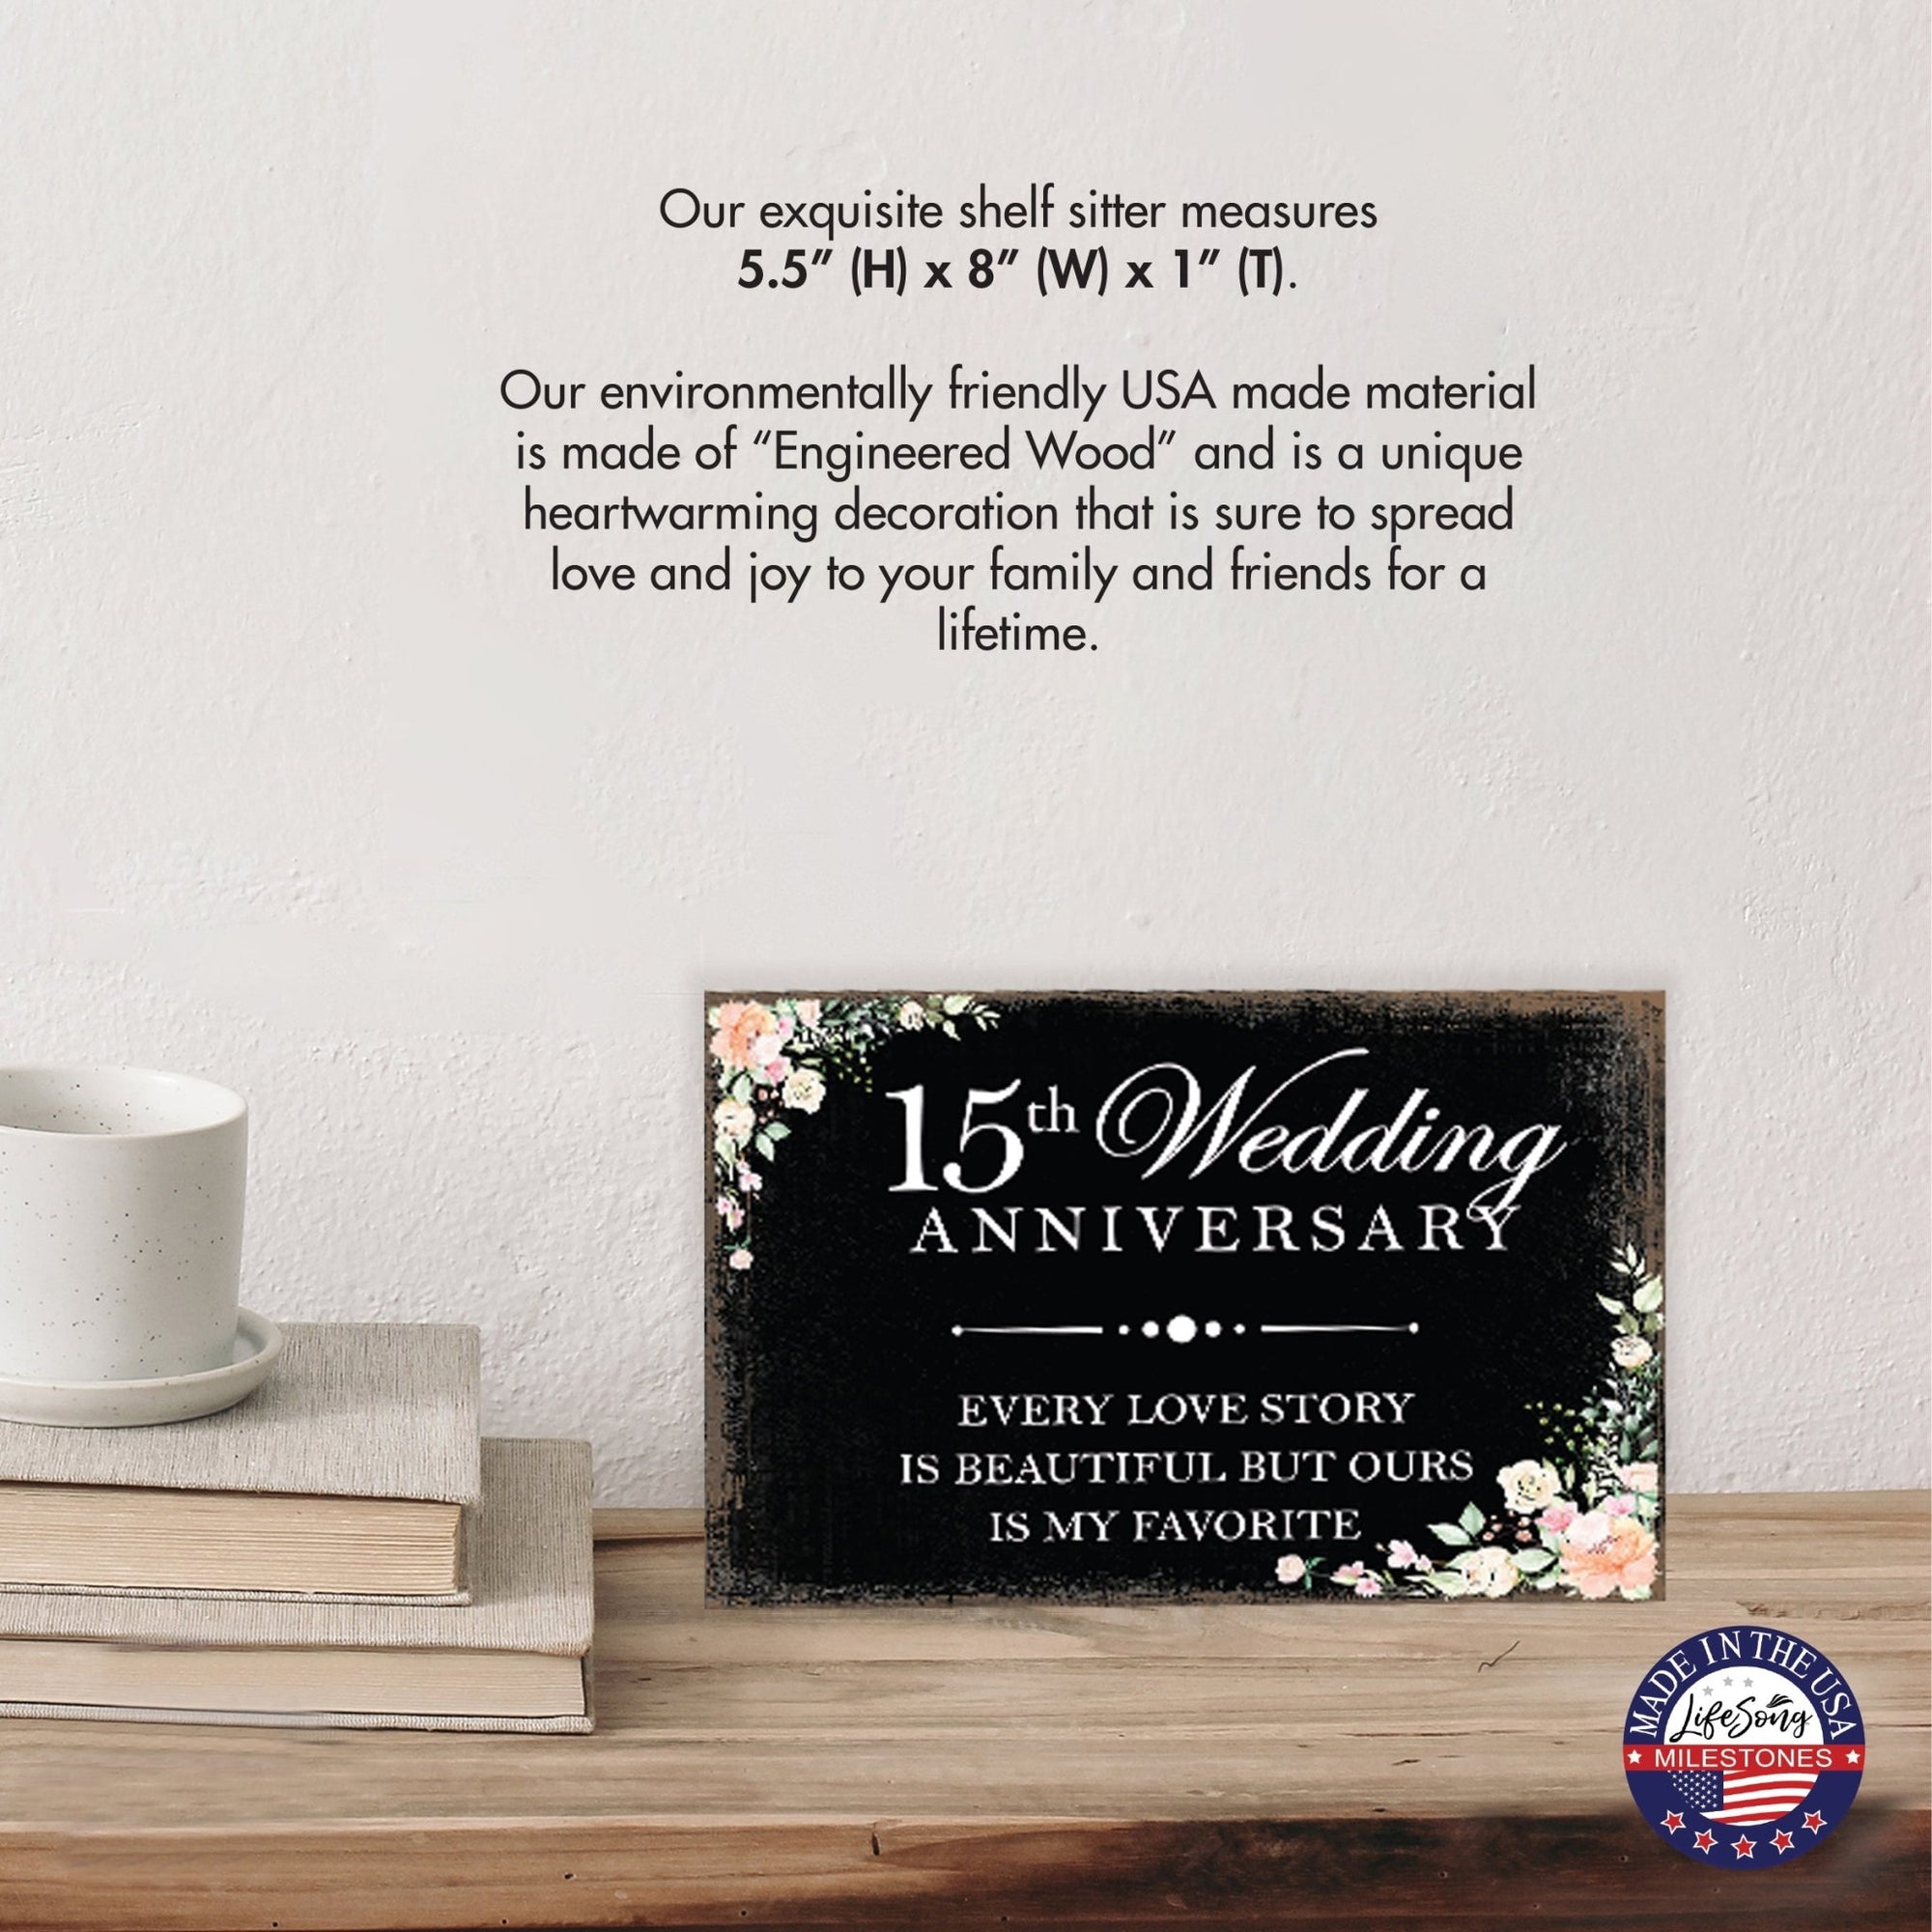 15th Wedding Anniversary Unique Shelf Decor and Tabletop Signs Gift for Couples - Every Love Story - LifeSong Milestones